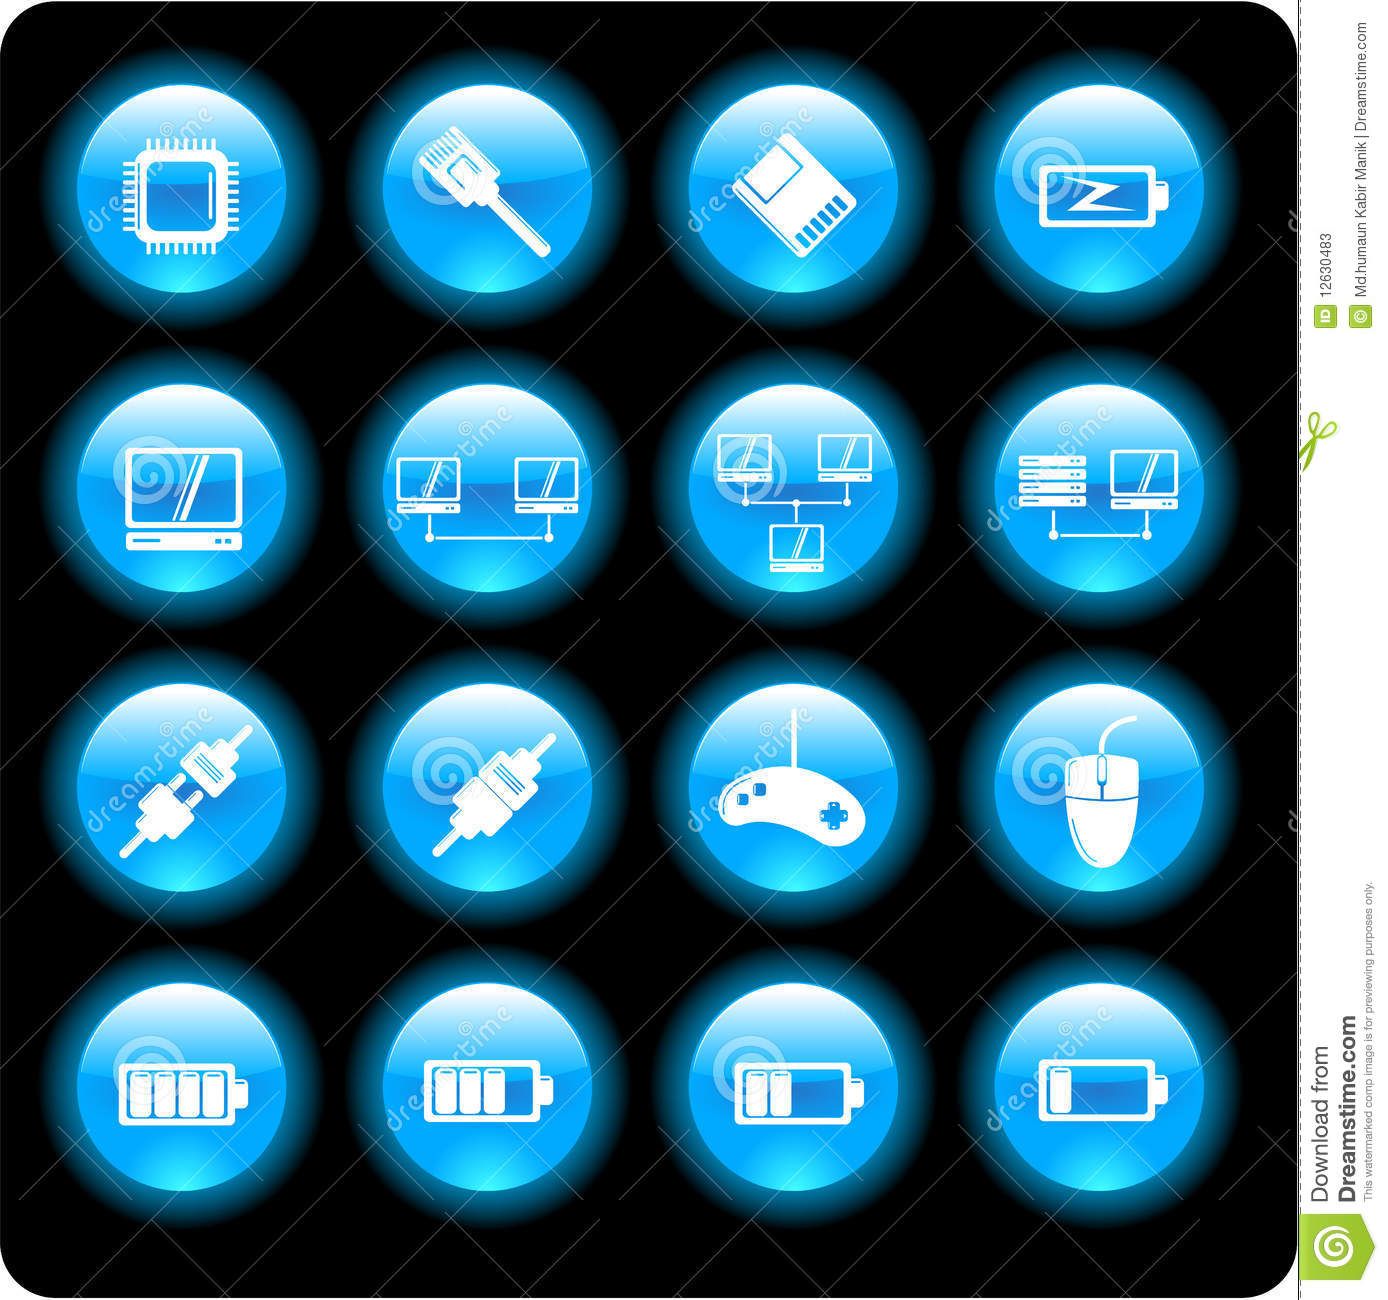 Computer Network Technology Icons